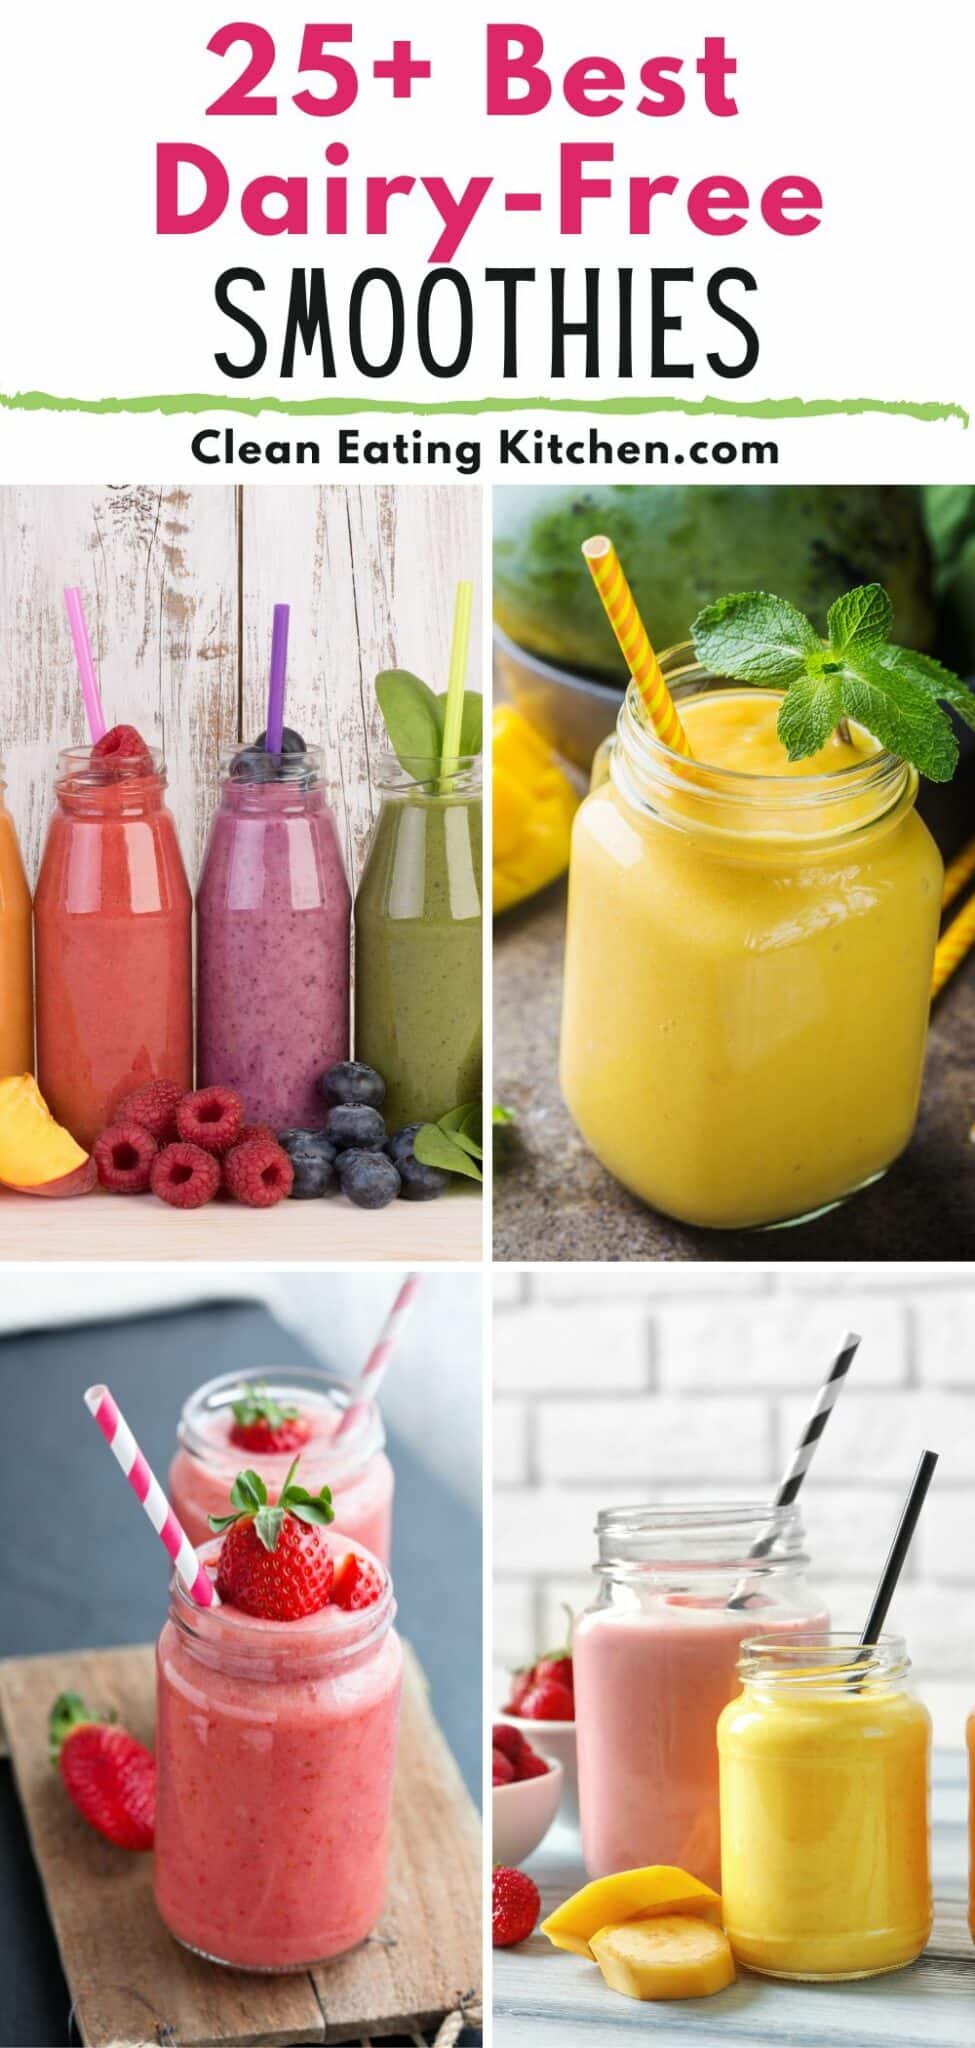 25+ Best Dairy-Free Smoothies - Clean Eating Kitchen